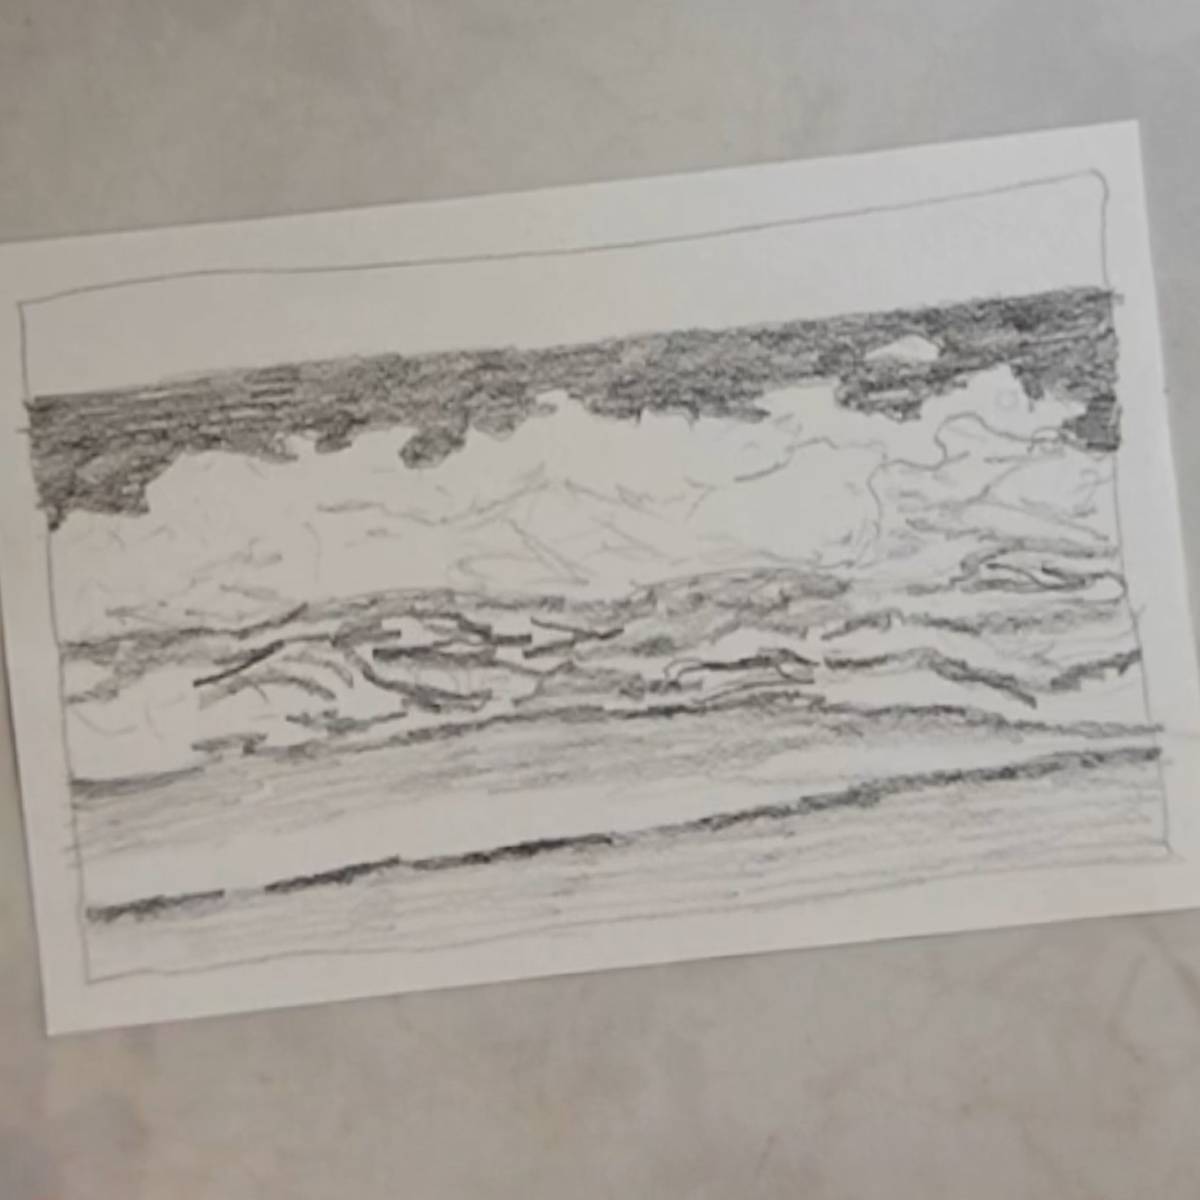 Final seascape sketch on table top.